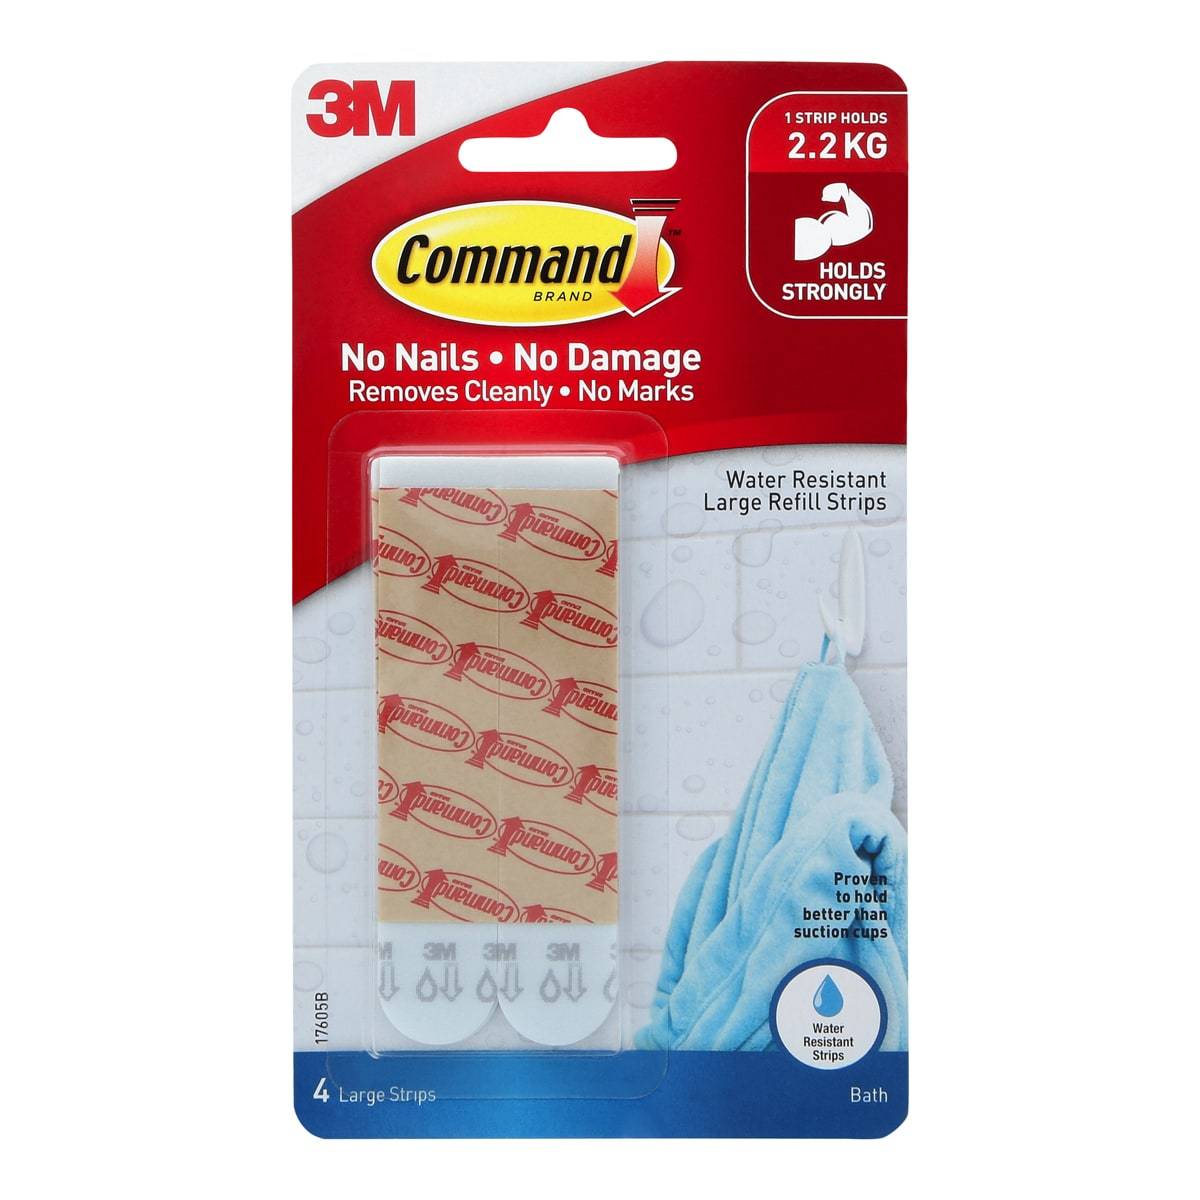 3M Command Water Resistant Strips 4 Large Strips